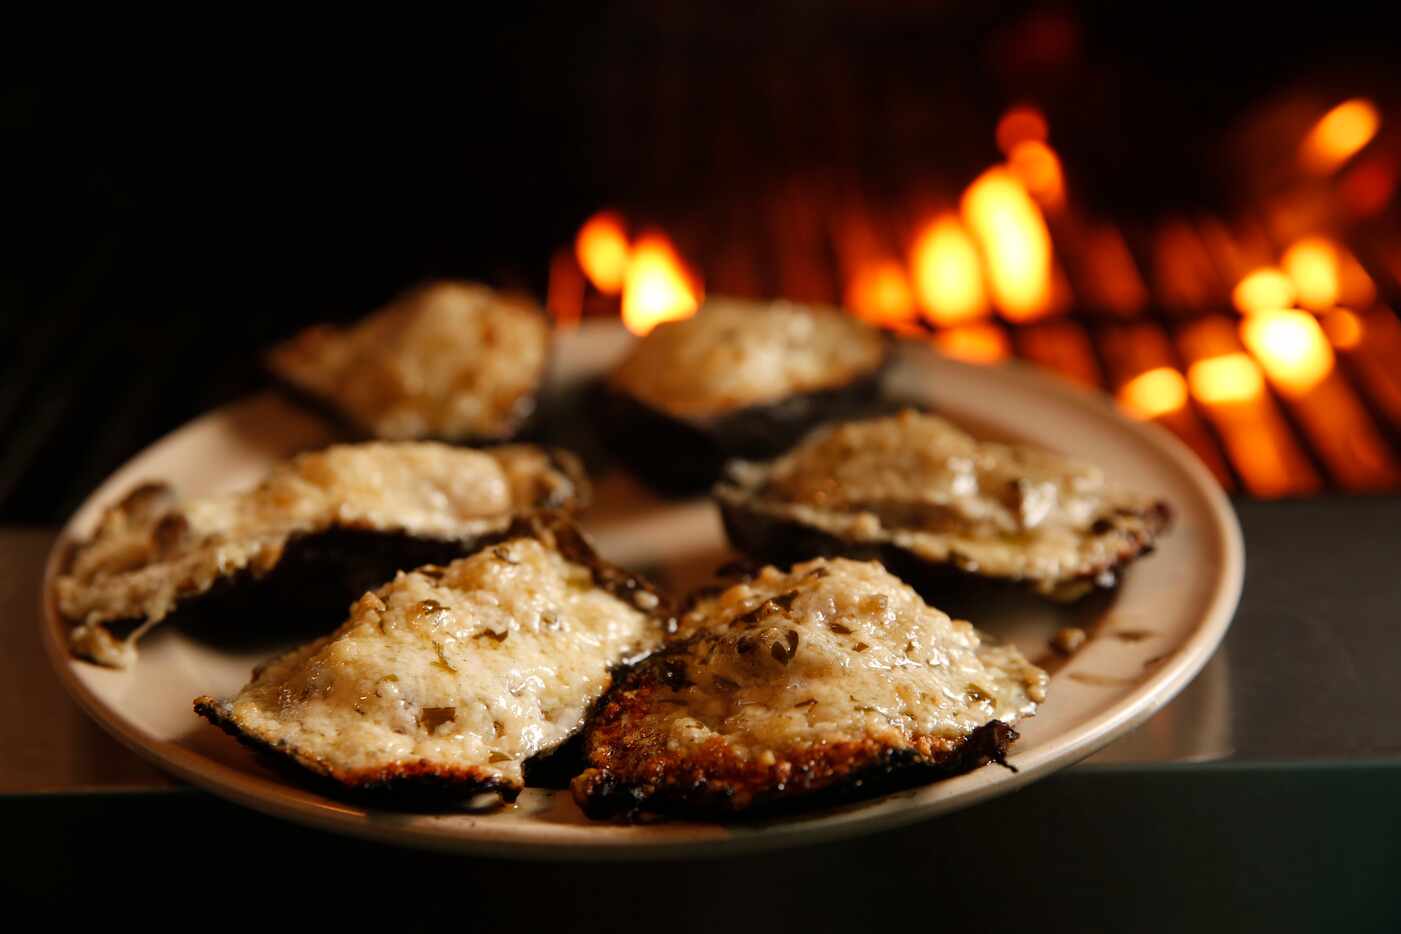 Chargrilled oysters at Casamento's Restaurant in the Touro neighborhood of New Orleans.